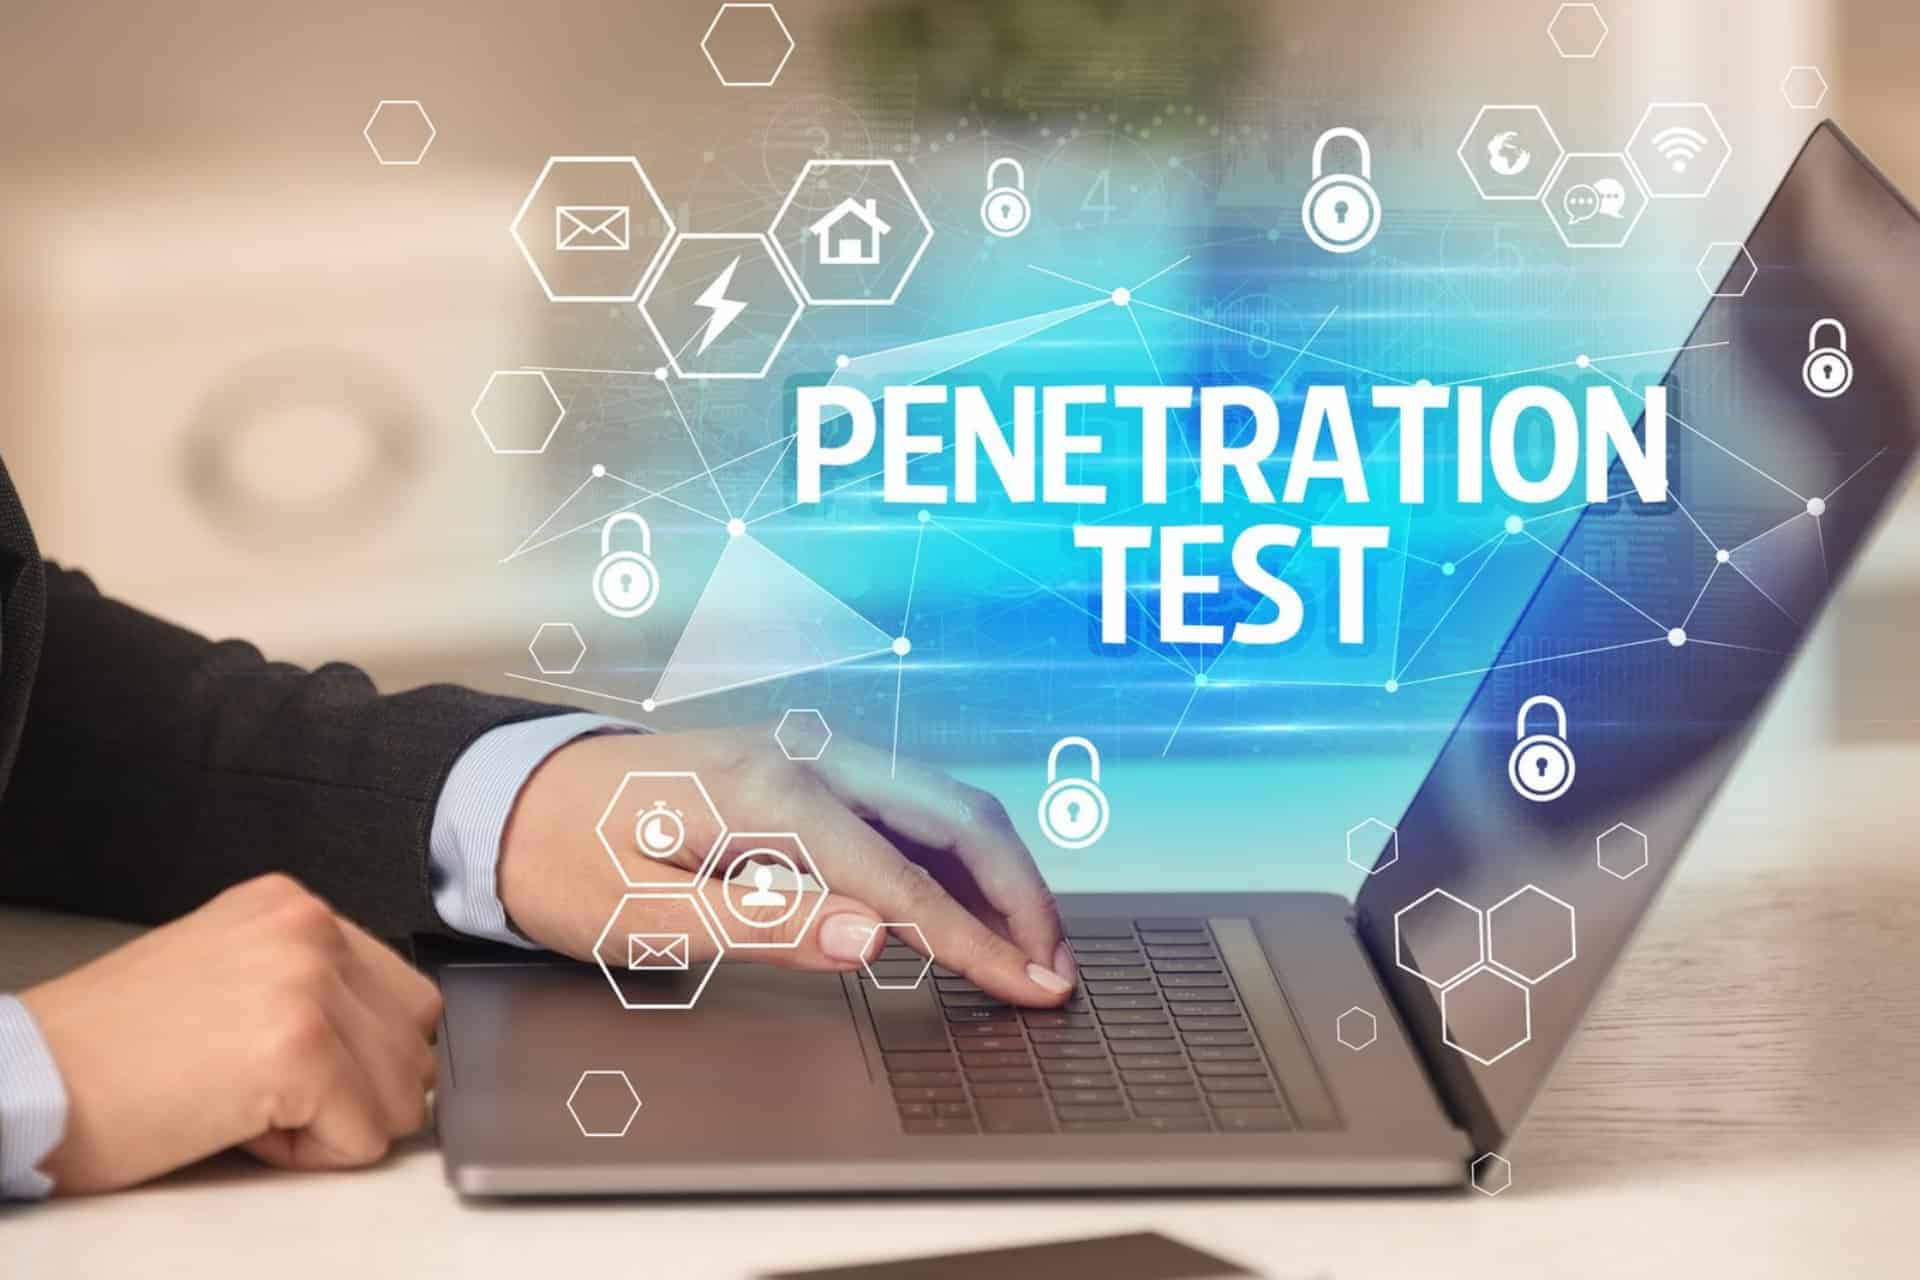 Person using the computer to search for penetration testing servics